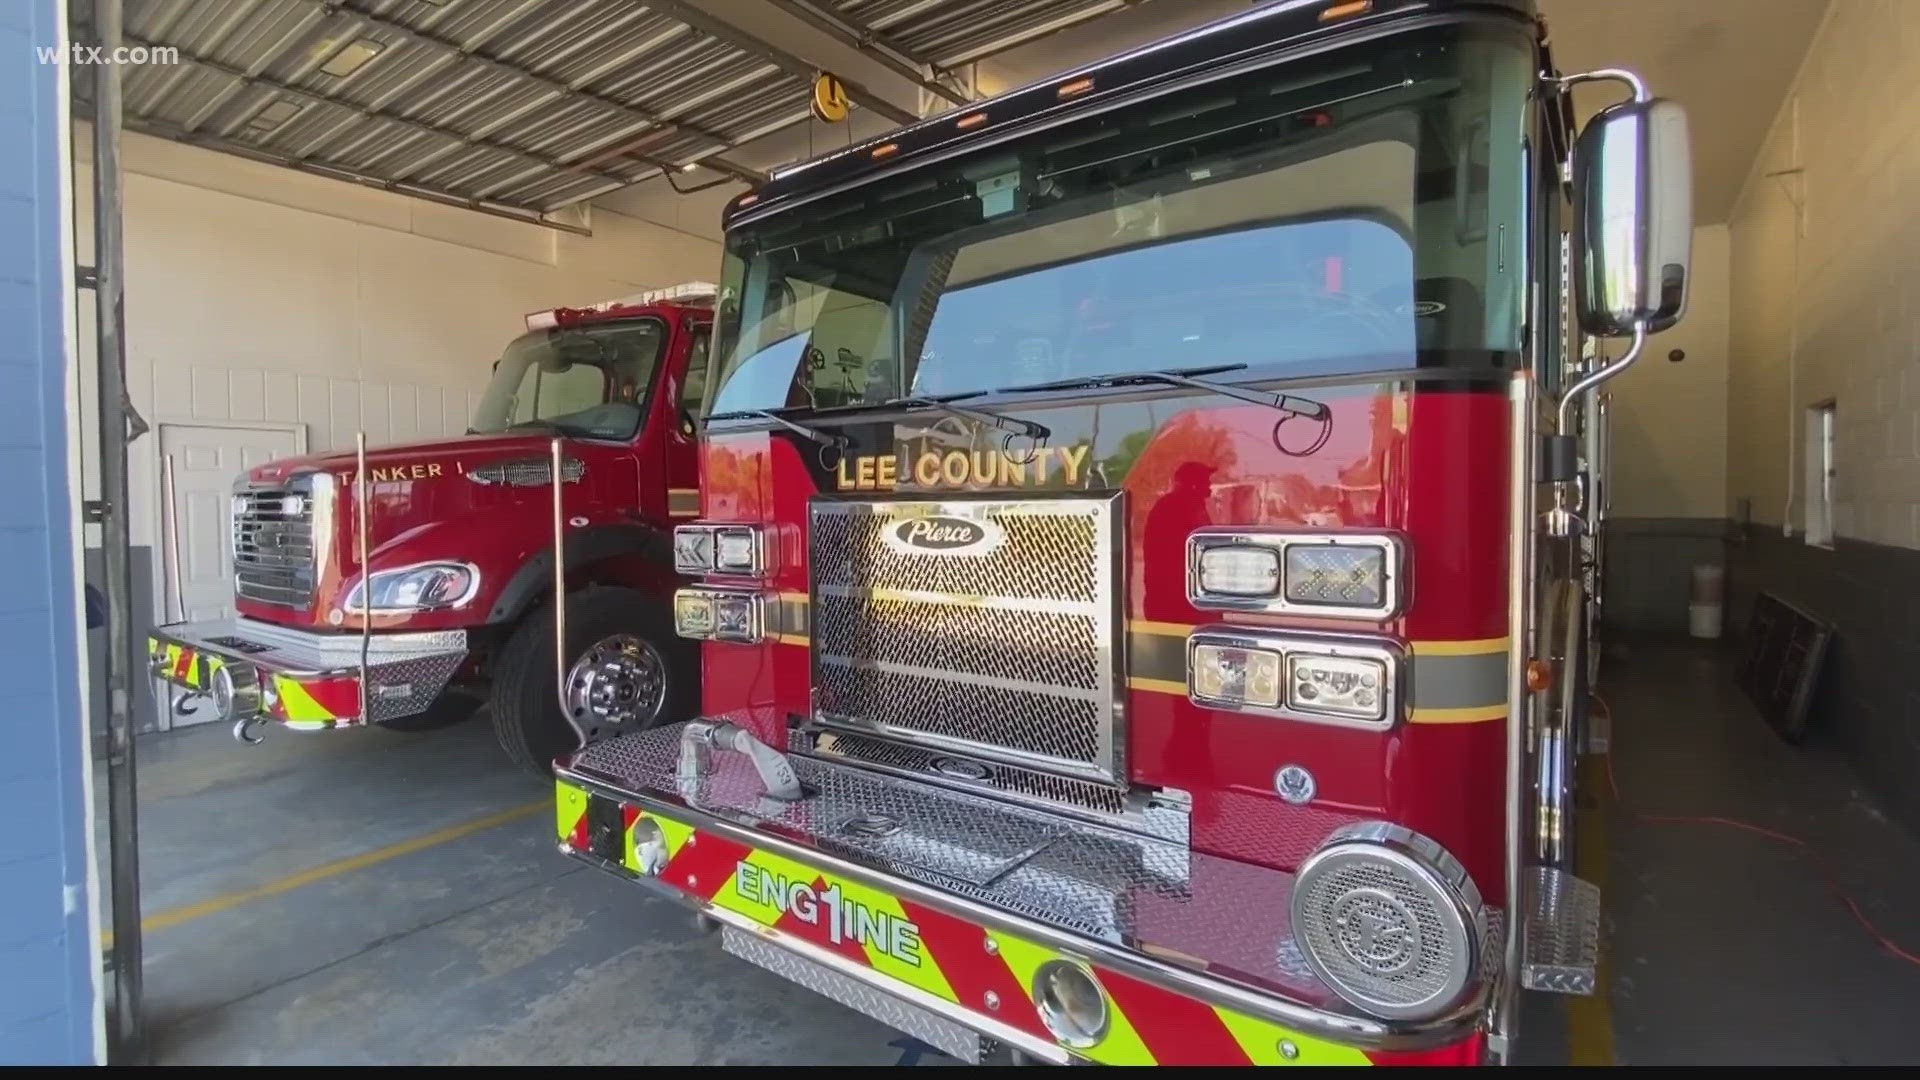 A new volunteer fire station is in the works for the Saint Charles community of Lee County.